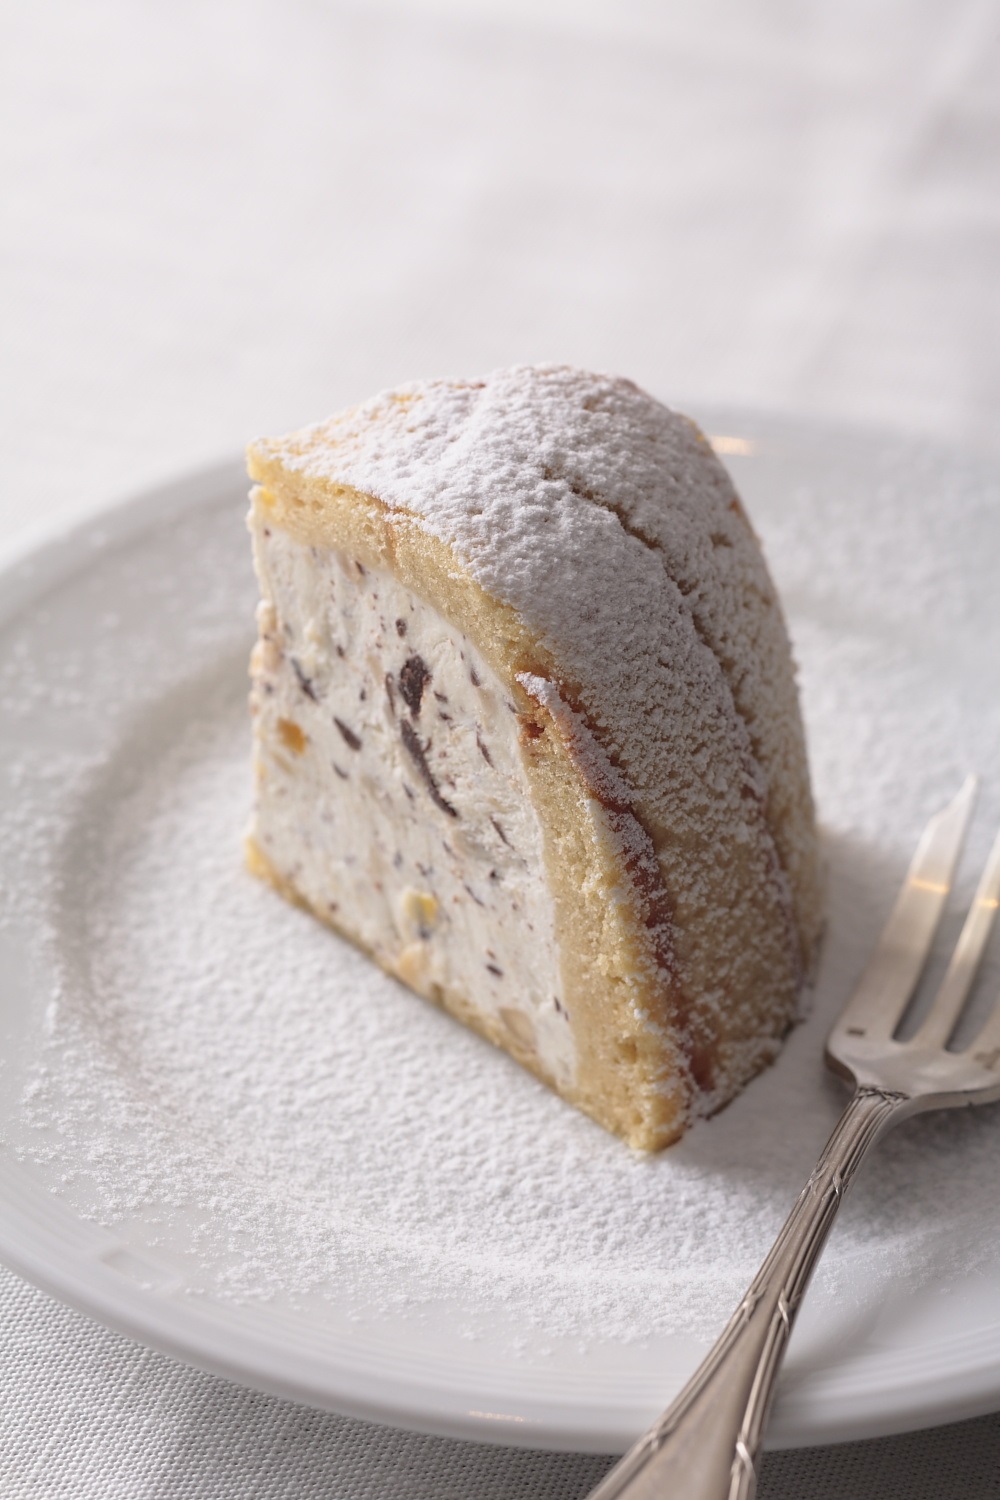 A slice of round, dome-shaped cake with filling and icing sugar with a fork on a plate